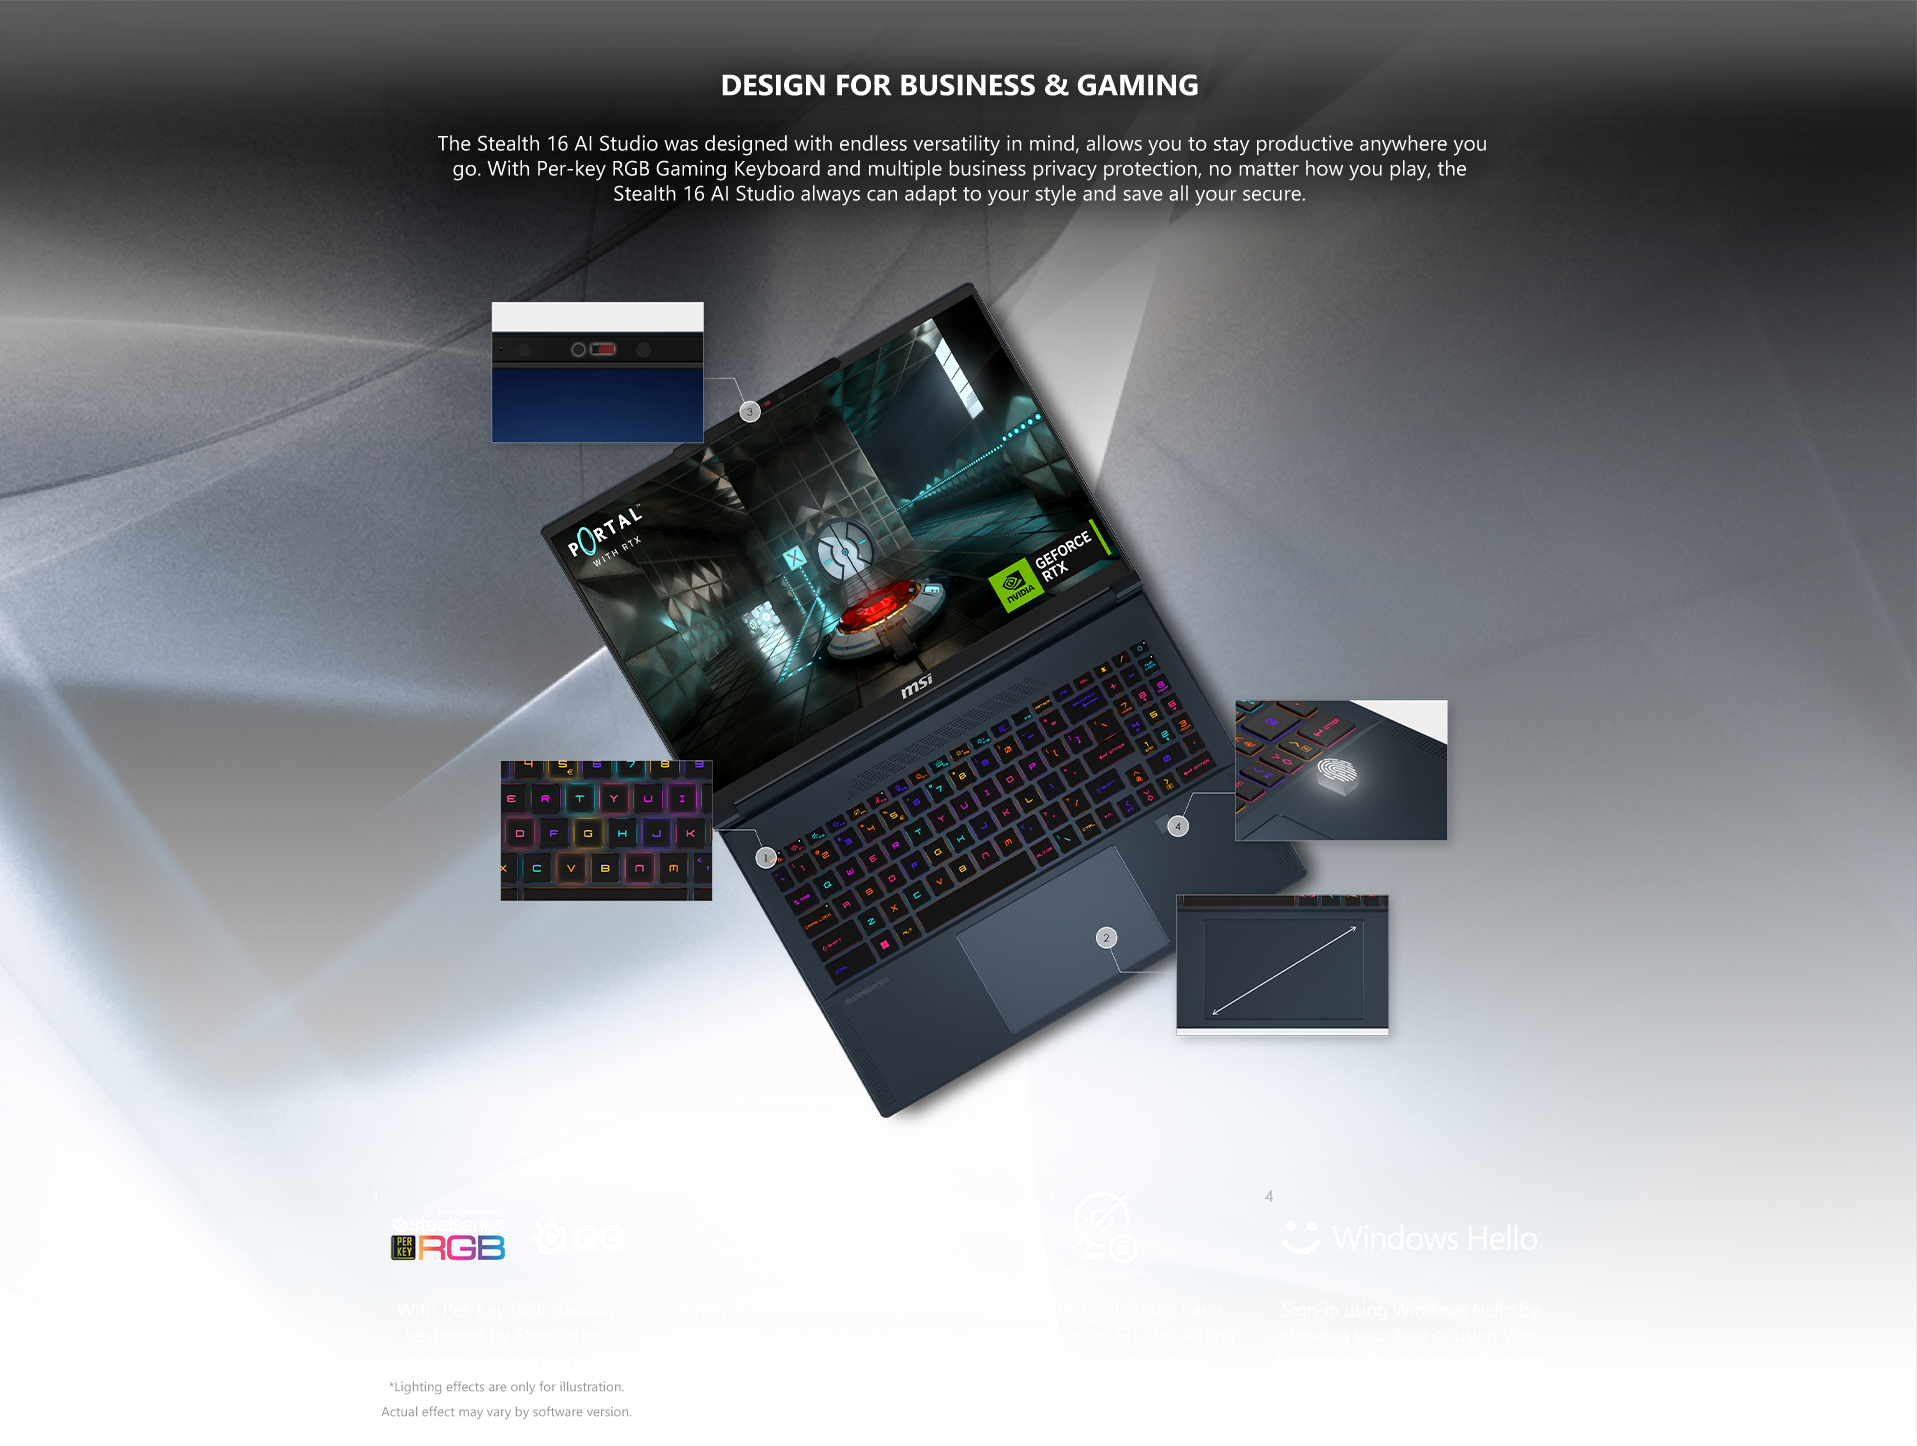  The Stealth 16 AI Studio was designed with endless versatility in mind, allows you to stay productive anywhere you go. With Per-key RGB Gaming Keyboard and multiple business privacy protection, no matter how you play, the Stealth 16 AI Studio always can adapt to your style and save all your secure.